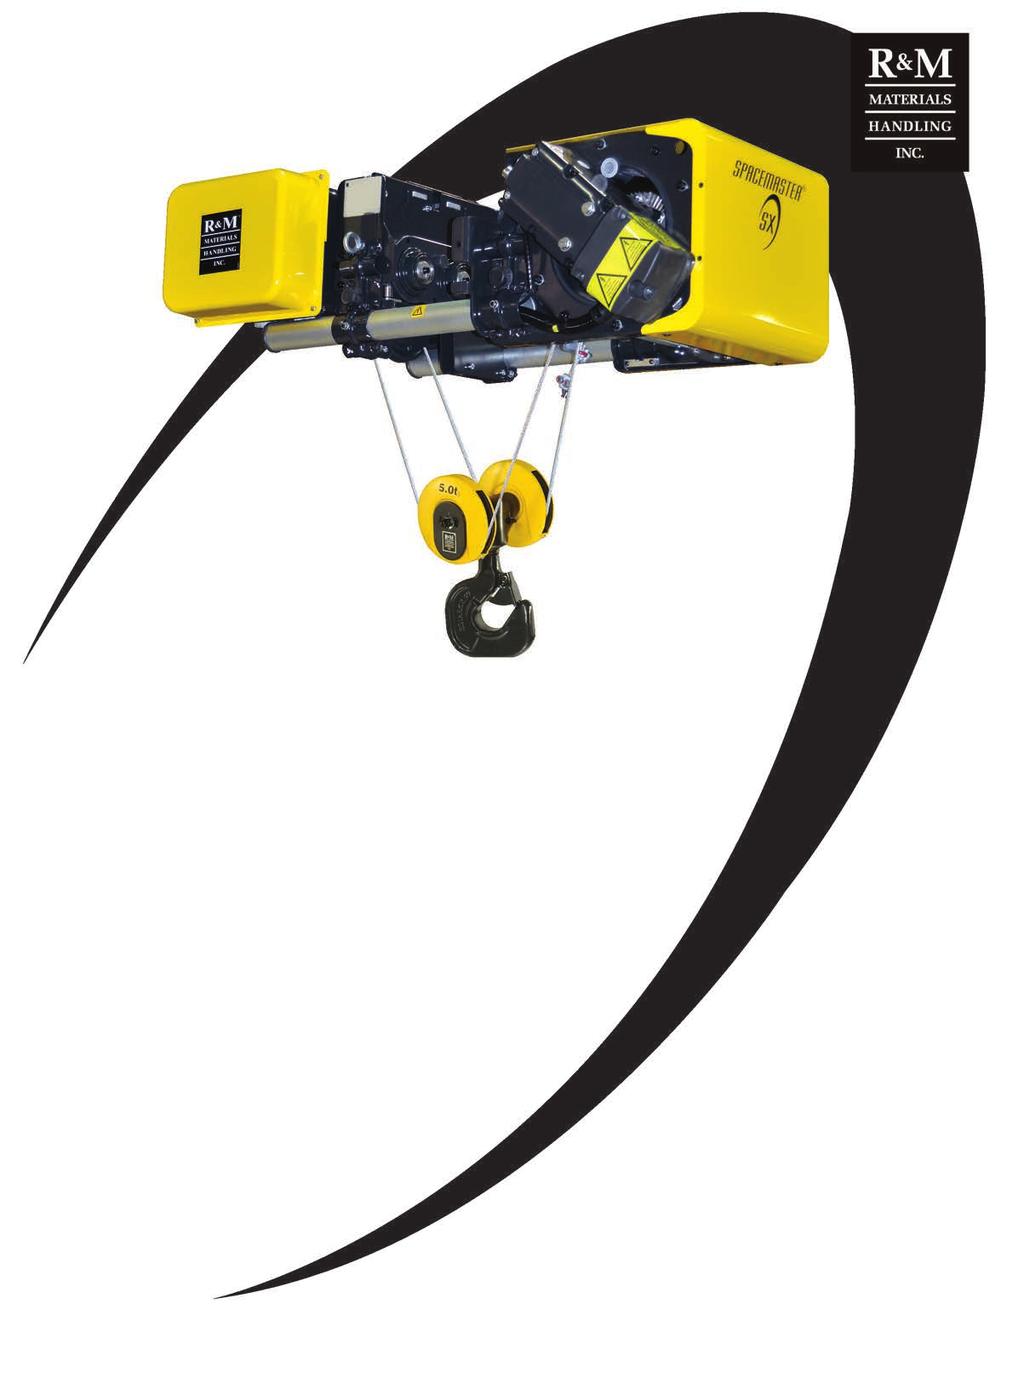 SPACEMASTER WIRE ROPE HOISTS The Spacemaster SX represents an innovative design that includes a large